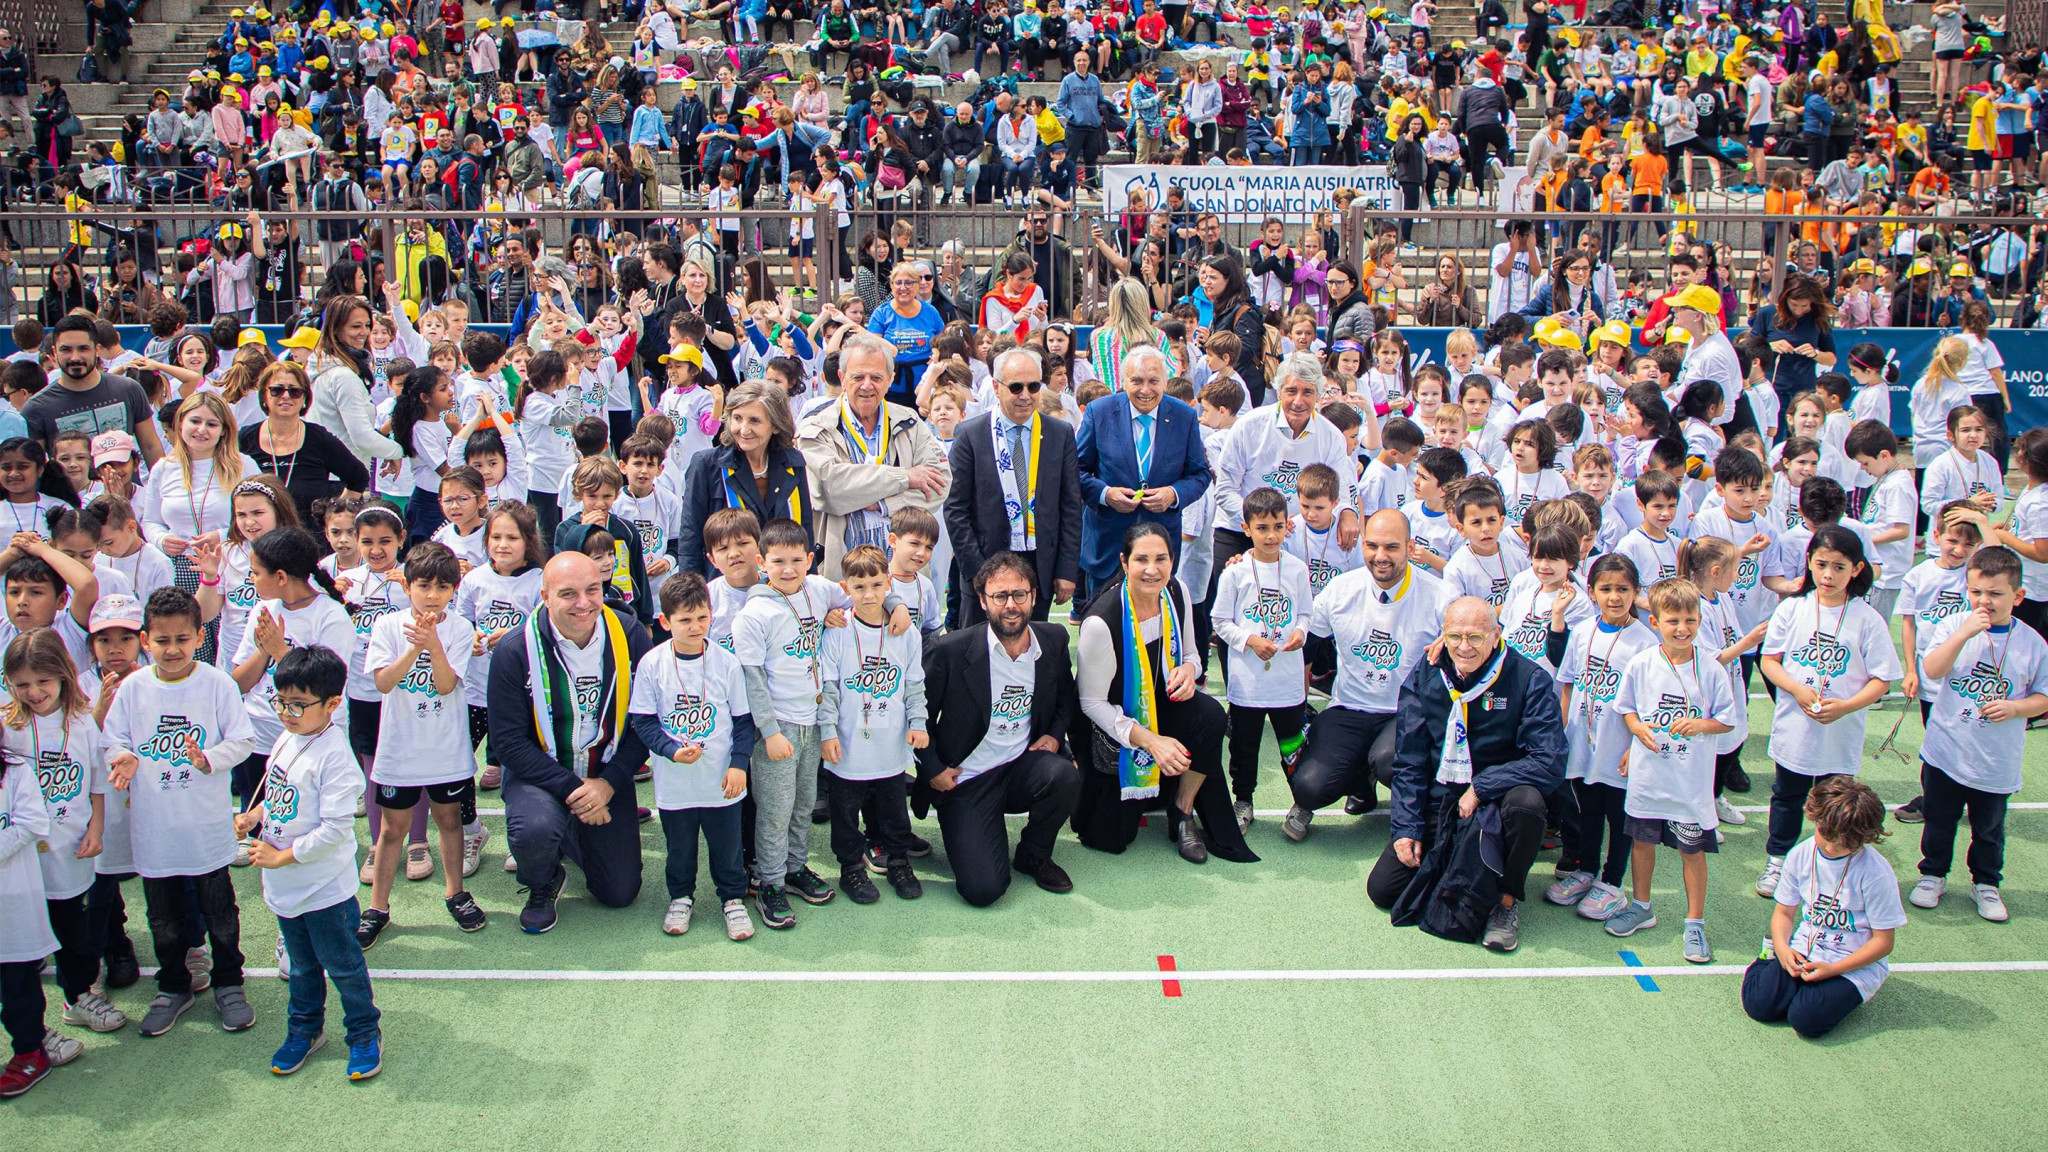 Youngsters take centre stage in marking 1,000-day Milan Cortina 2026 milestone